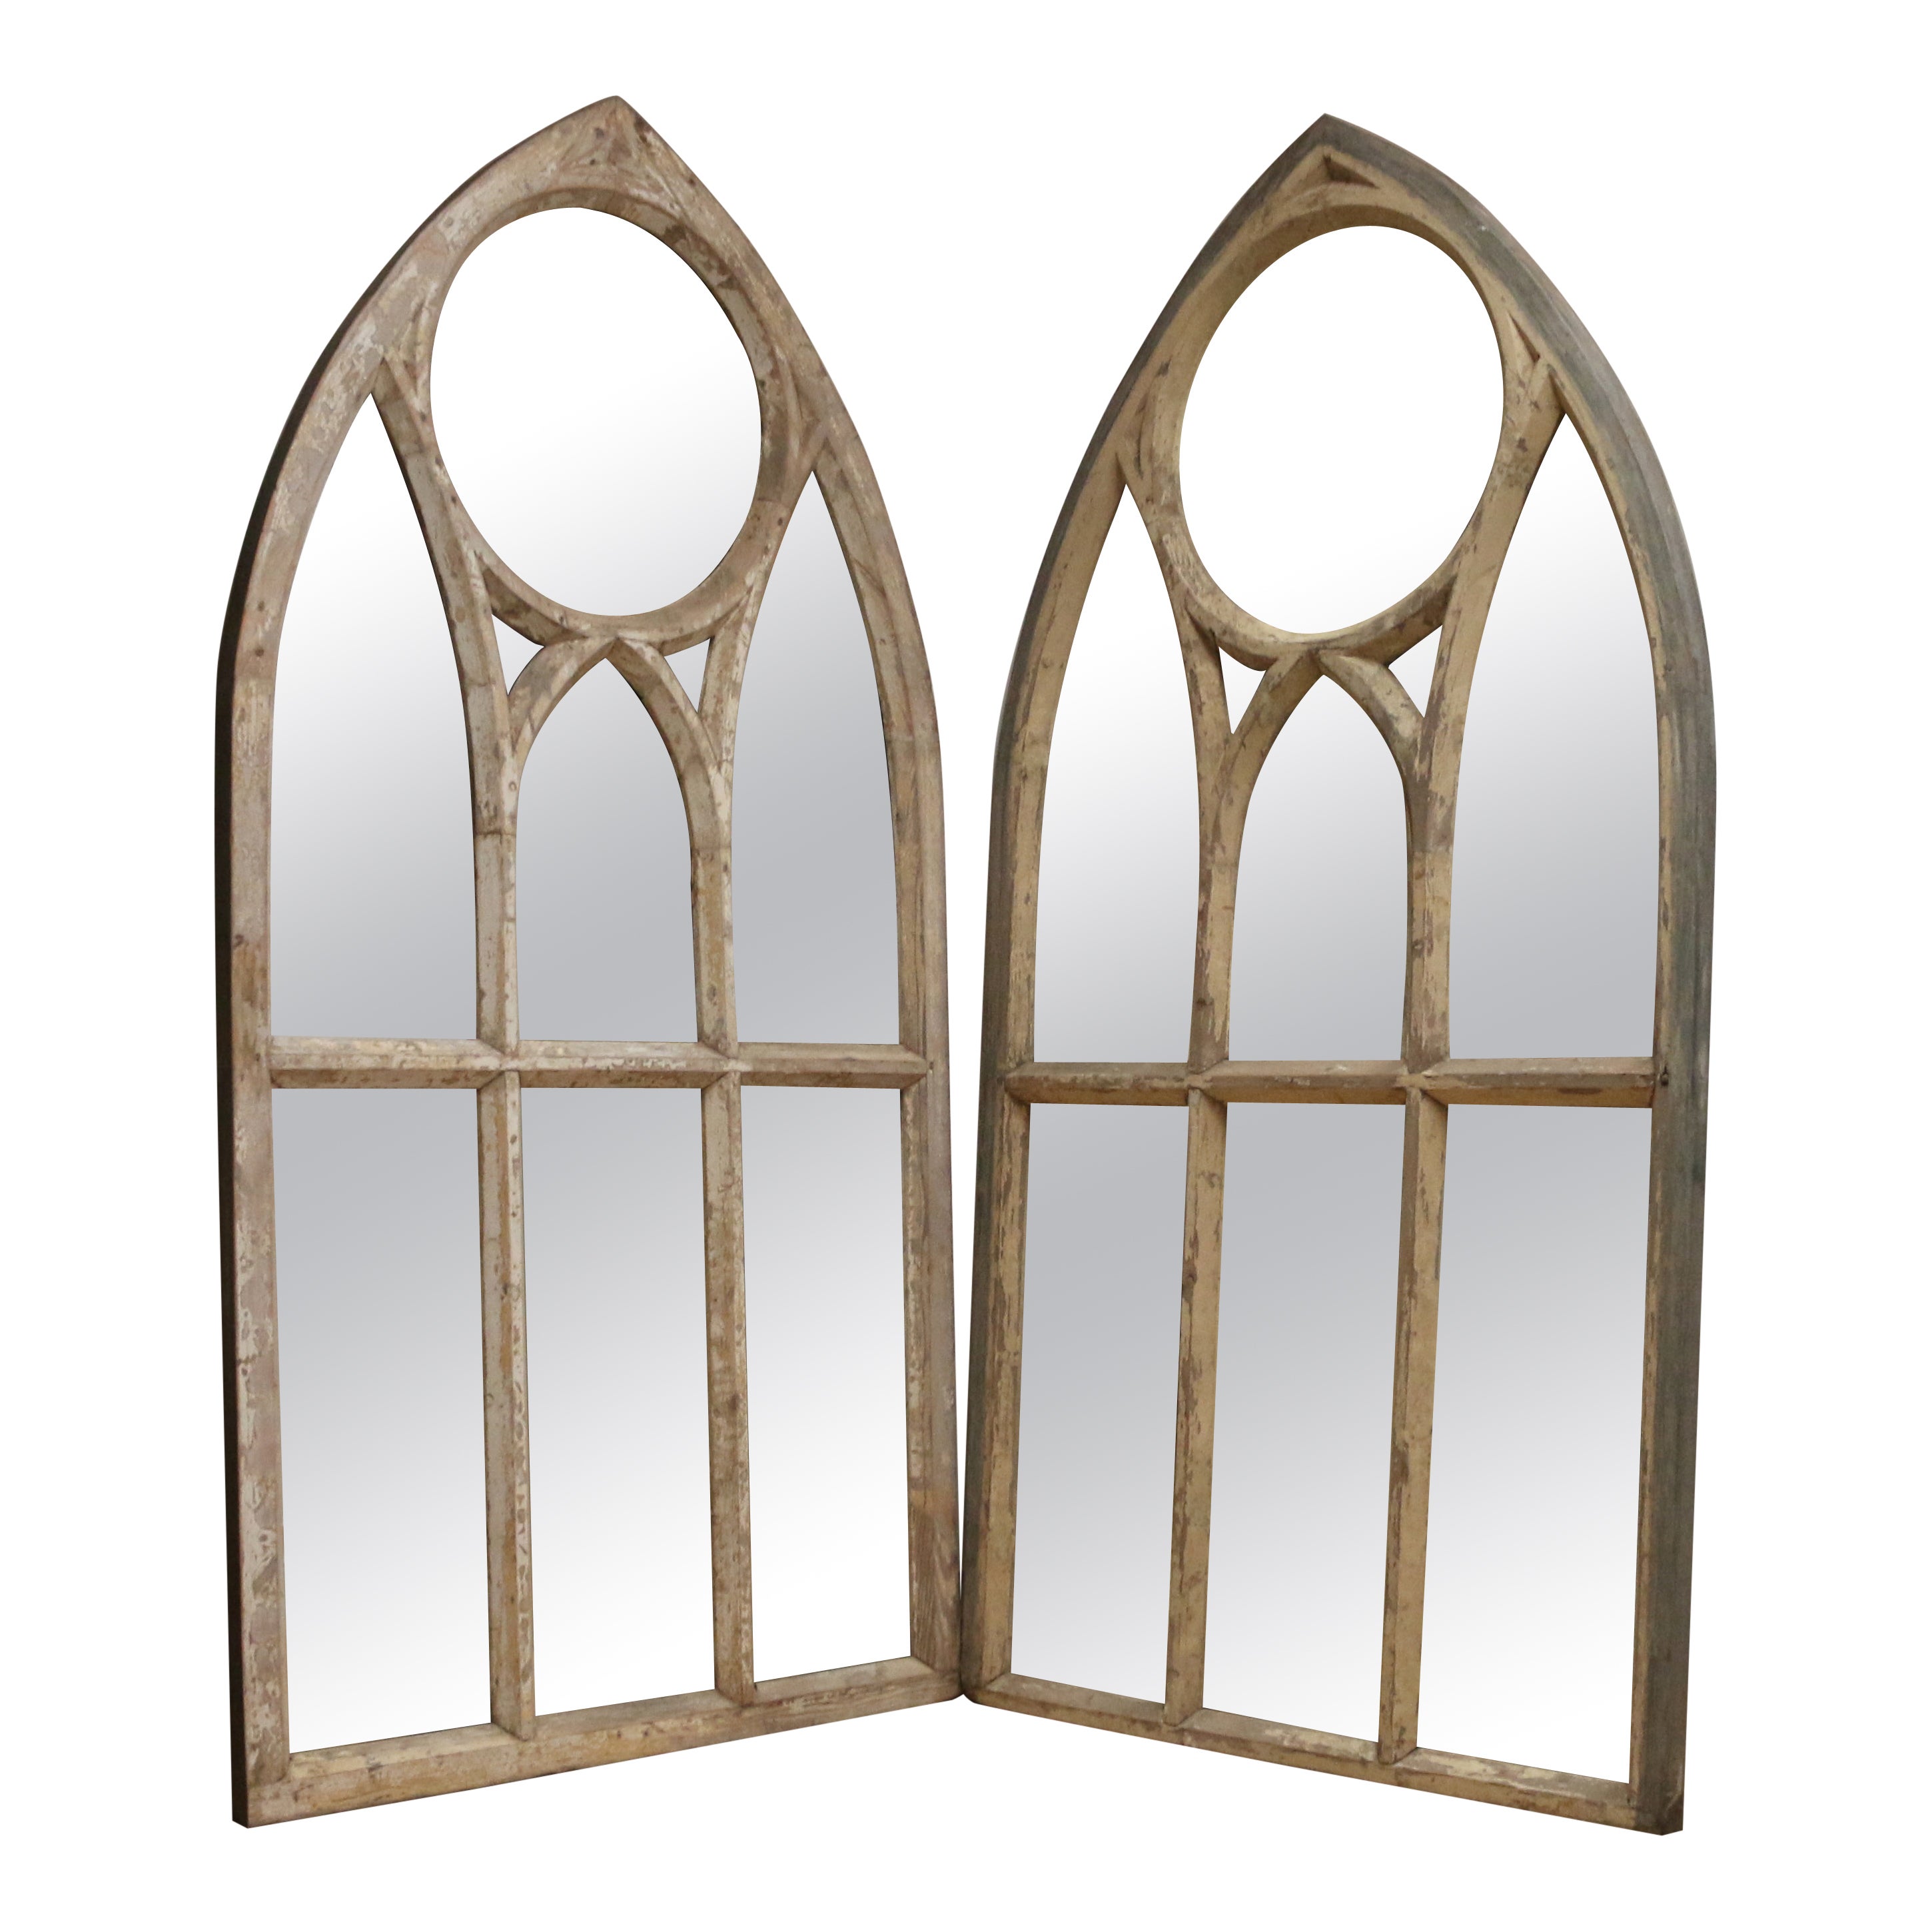 Huge Gothic Arched Window Mirrors For Sale